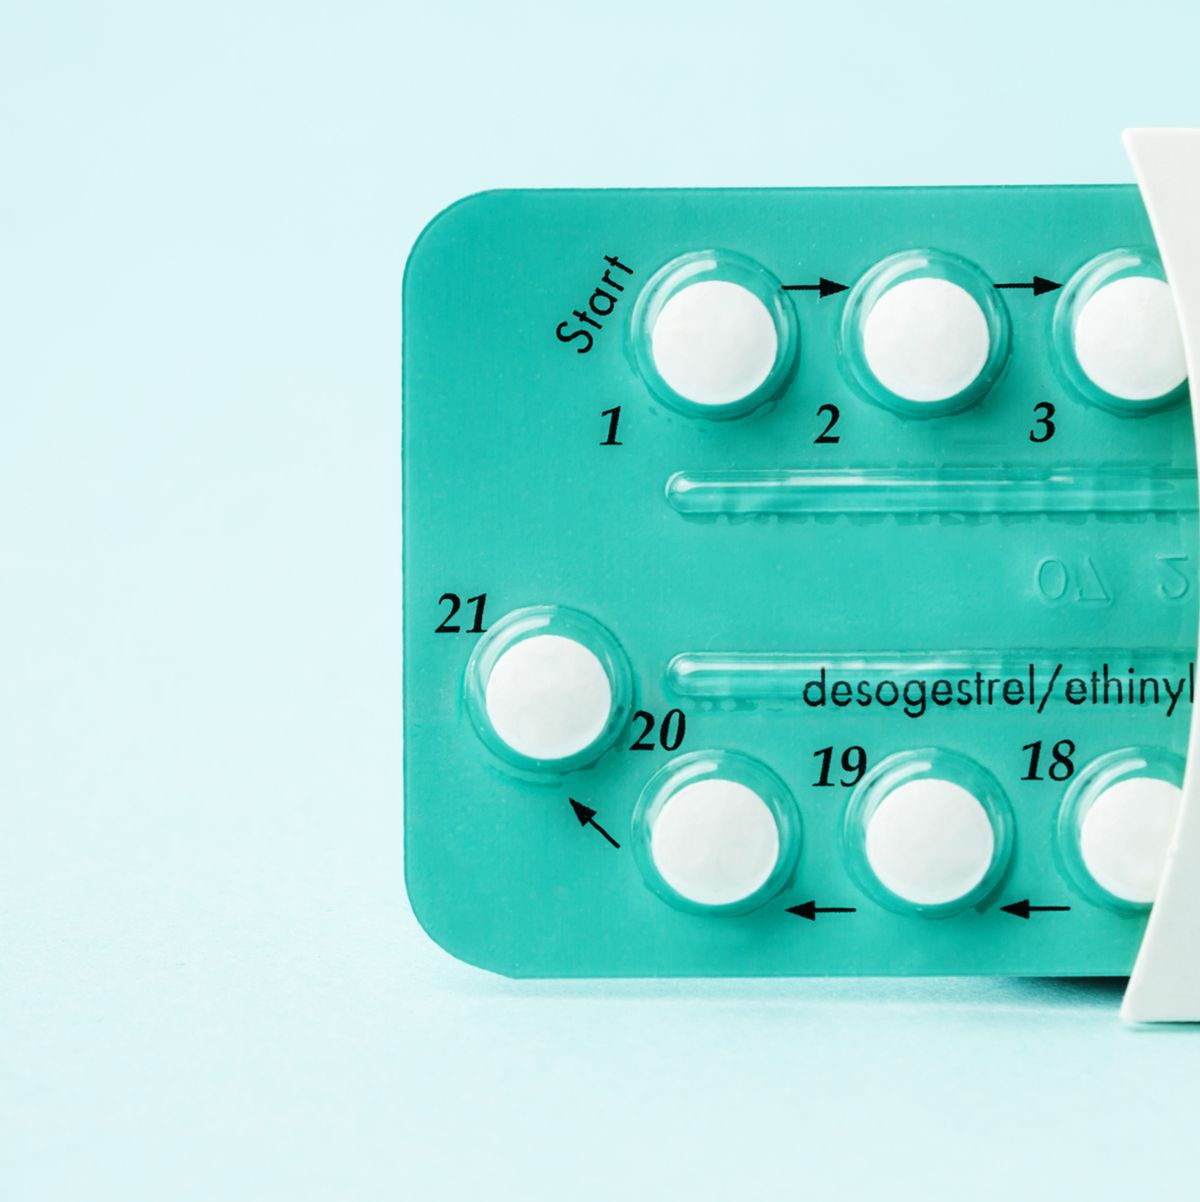 What can stop the contraceptive pill working